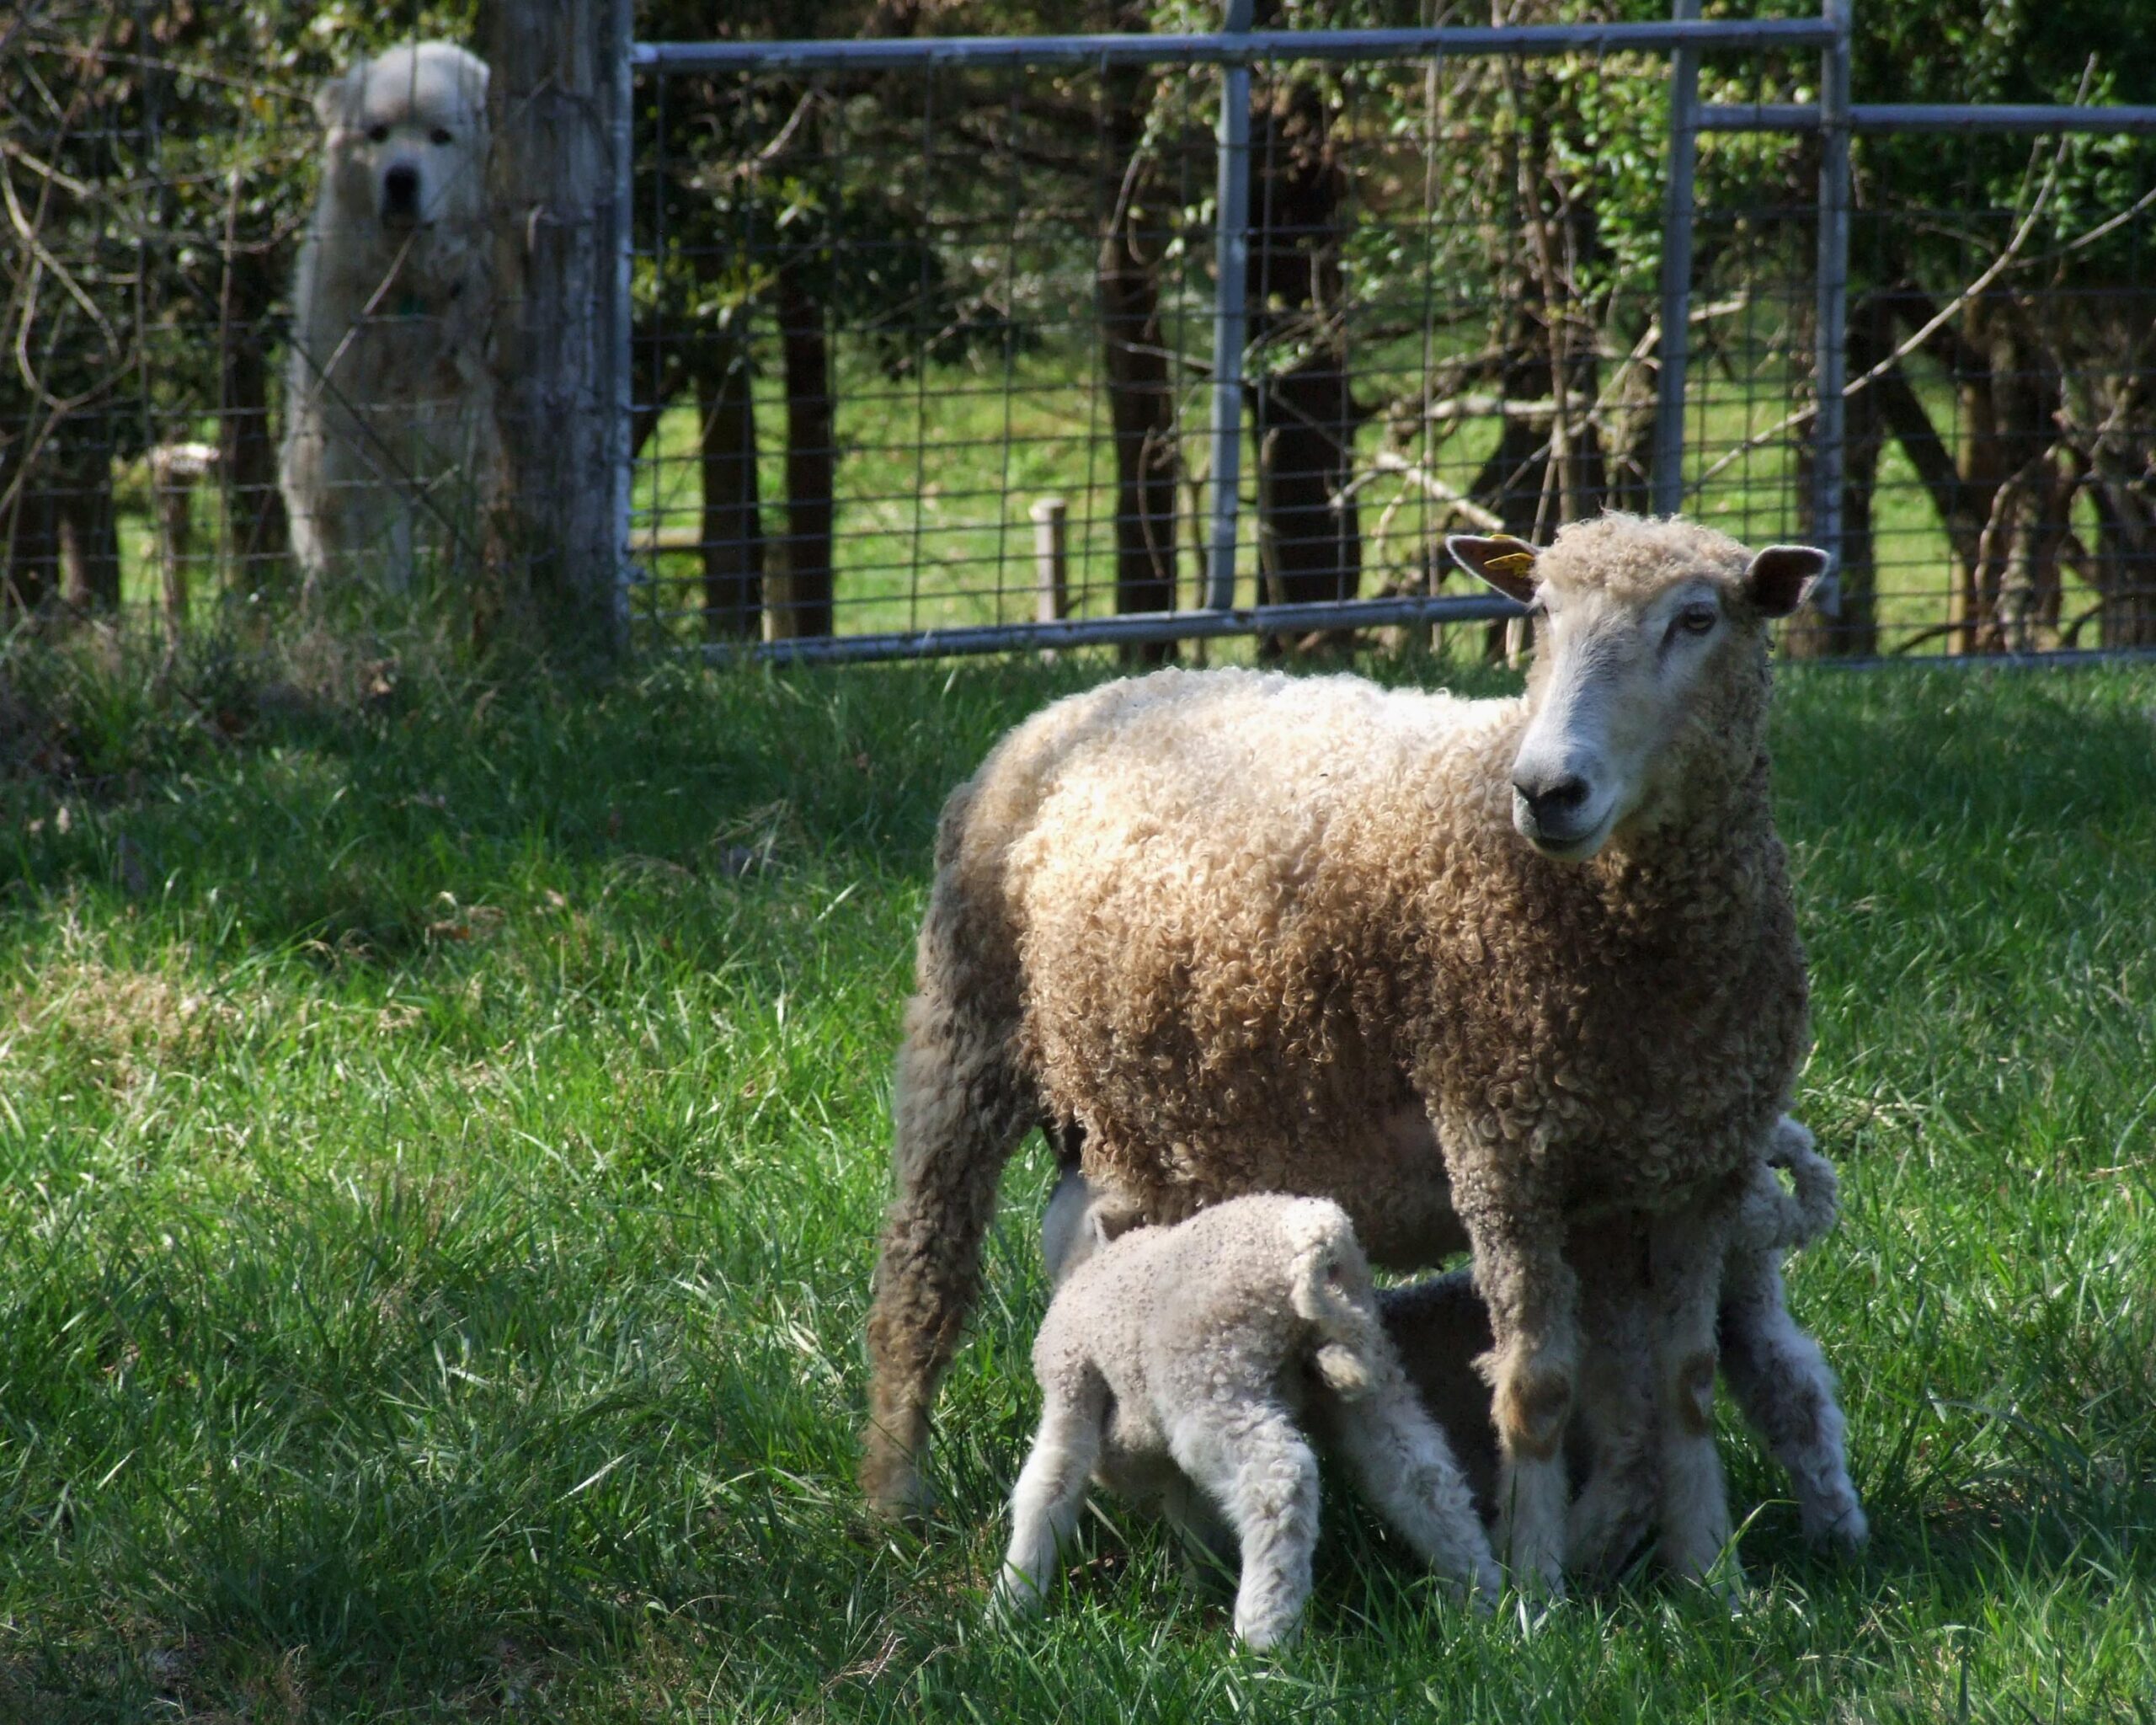 https://livestockconservancy.org/wp-content/uploads/2022/08/Leicester-Longwool-Ewe-and-Lambs-scaled.jpg